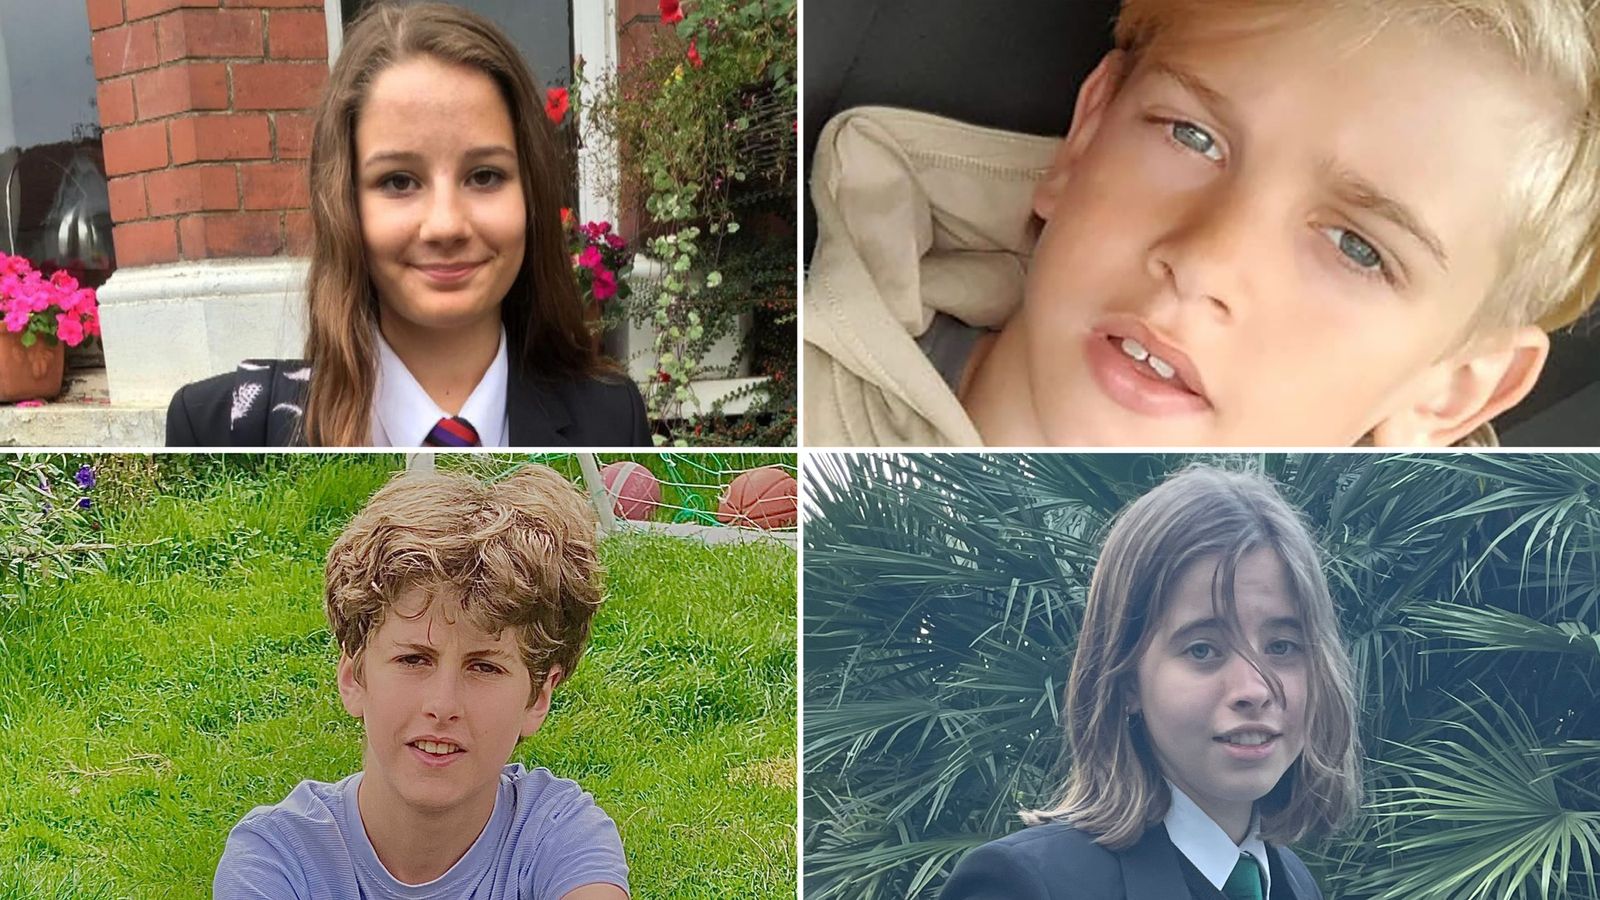 'What happened to you?': Parents whose children took own lives demand access to content they were exposed to online